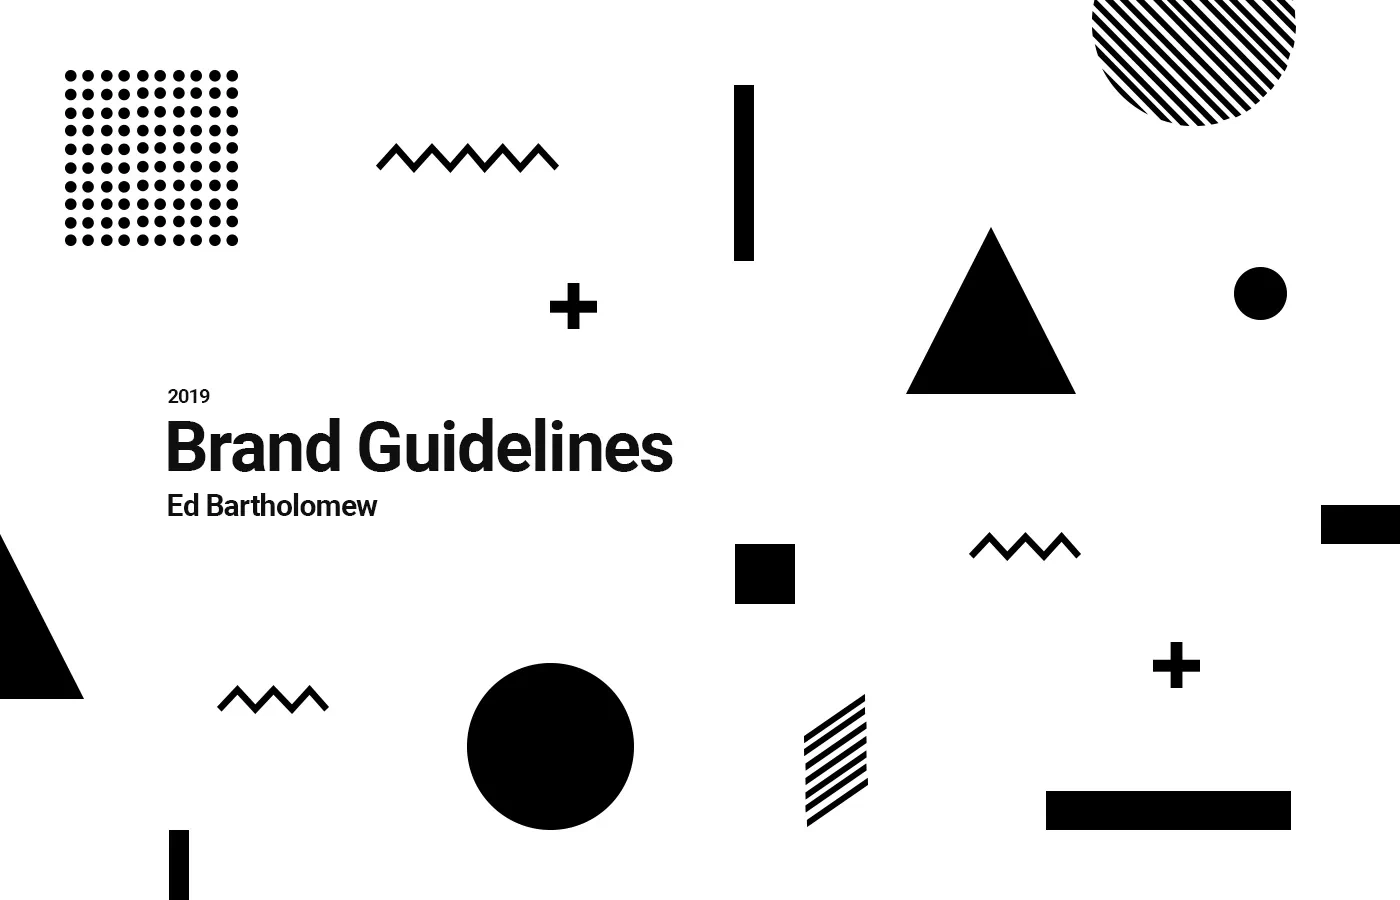 The cover page of the 2019 Ed Bartholomew Brand Guidelines. Black and white shapes are spread out across the page in a modern and minimalist style